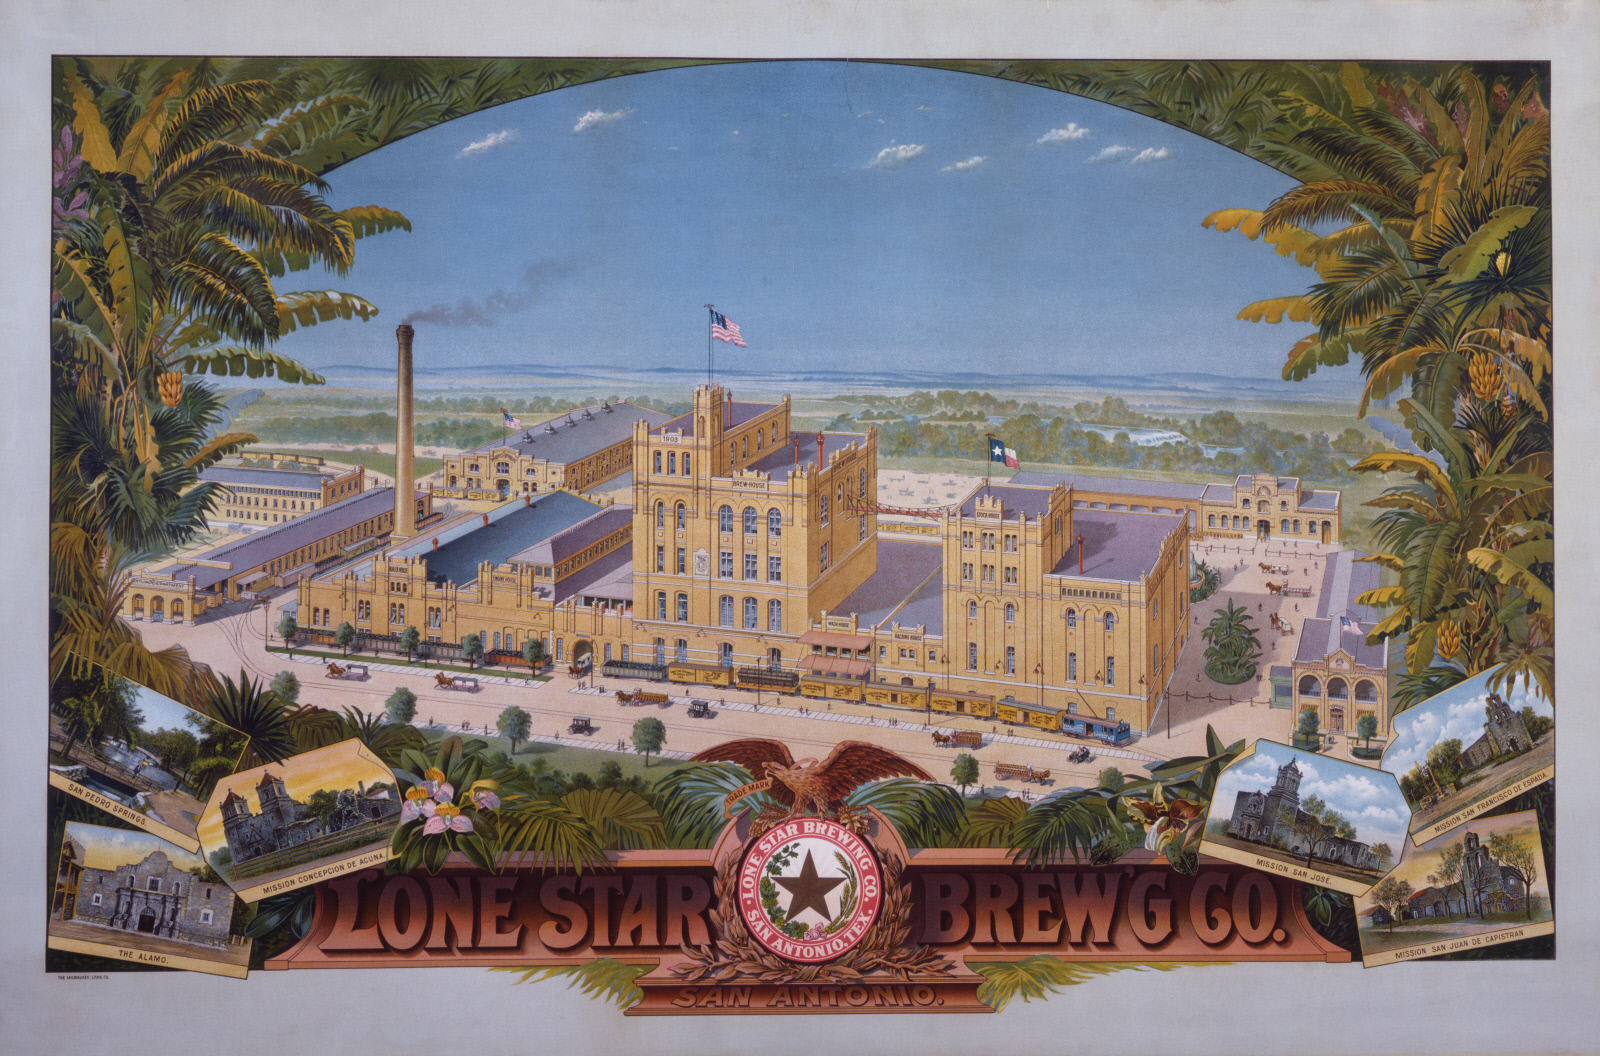 Image: The Milwaukee Lithographing and Engraving Company (American, 1852 - 1920). Lone Star Brewing Co., San Antonio, 1903. Colored lithograph on paper. 27 x 41 1/2 in. (68.6 x 105.4 cm). Museum purchase, 74.93